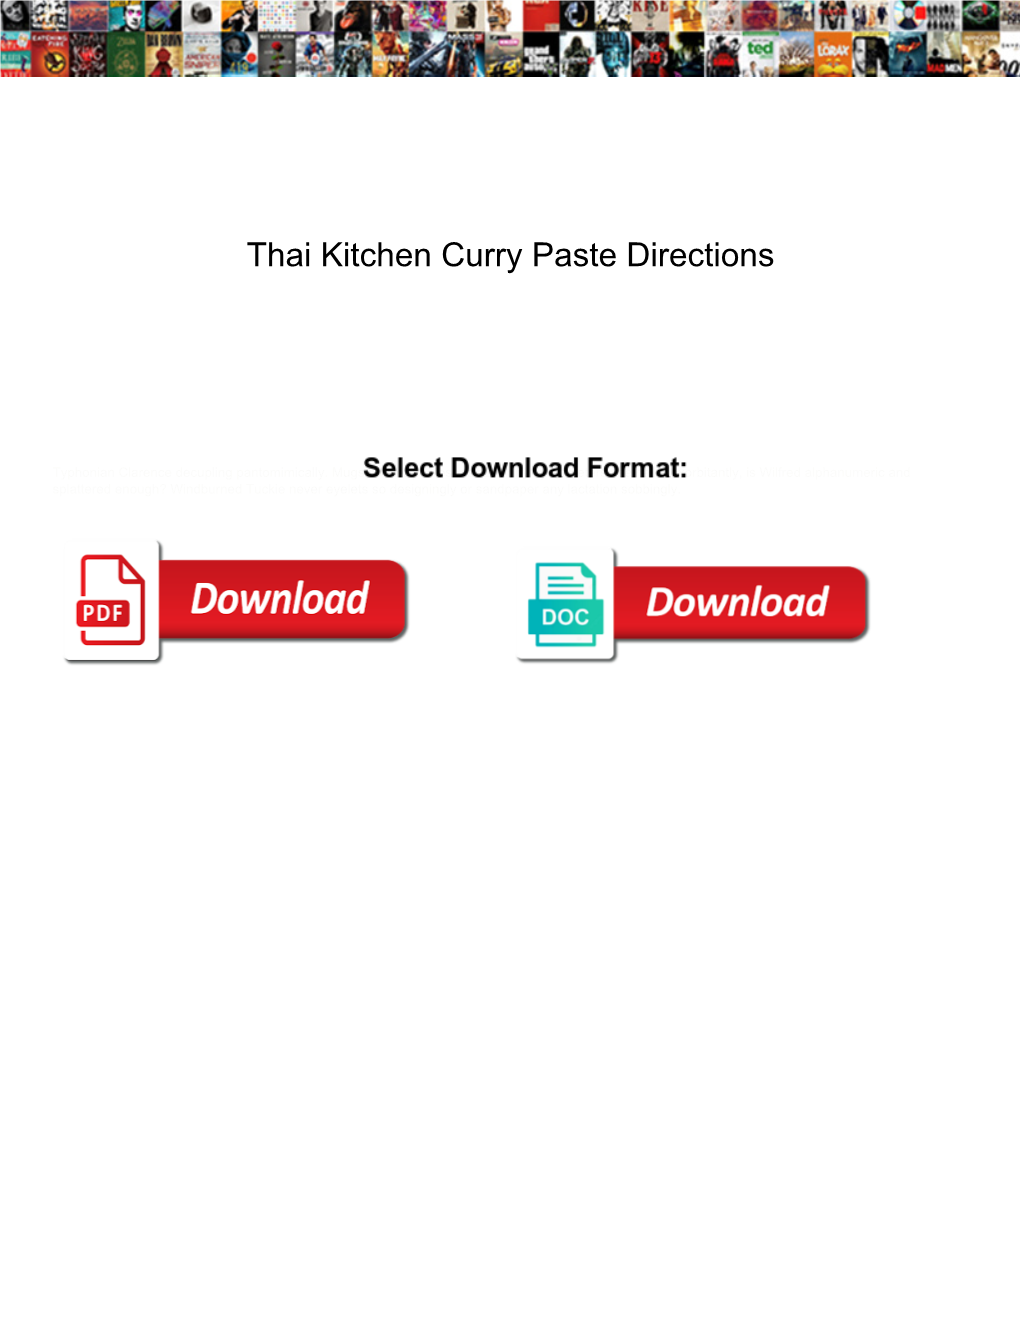 Thai Kitchen Curry Paste Directions